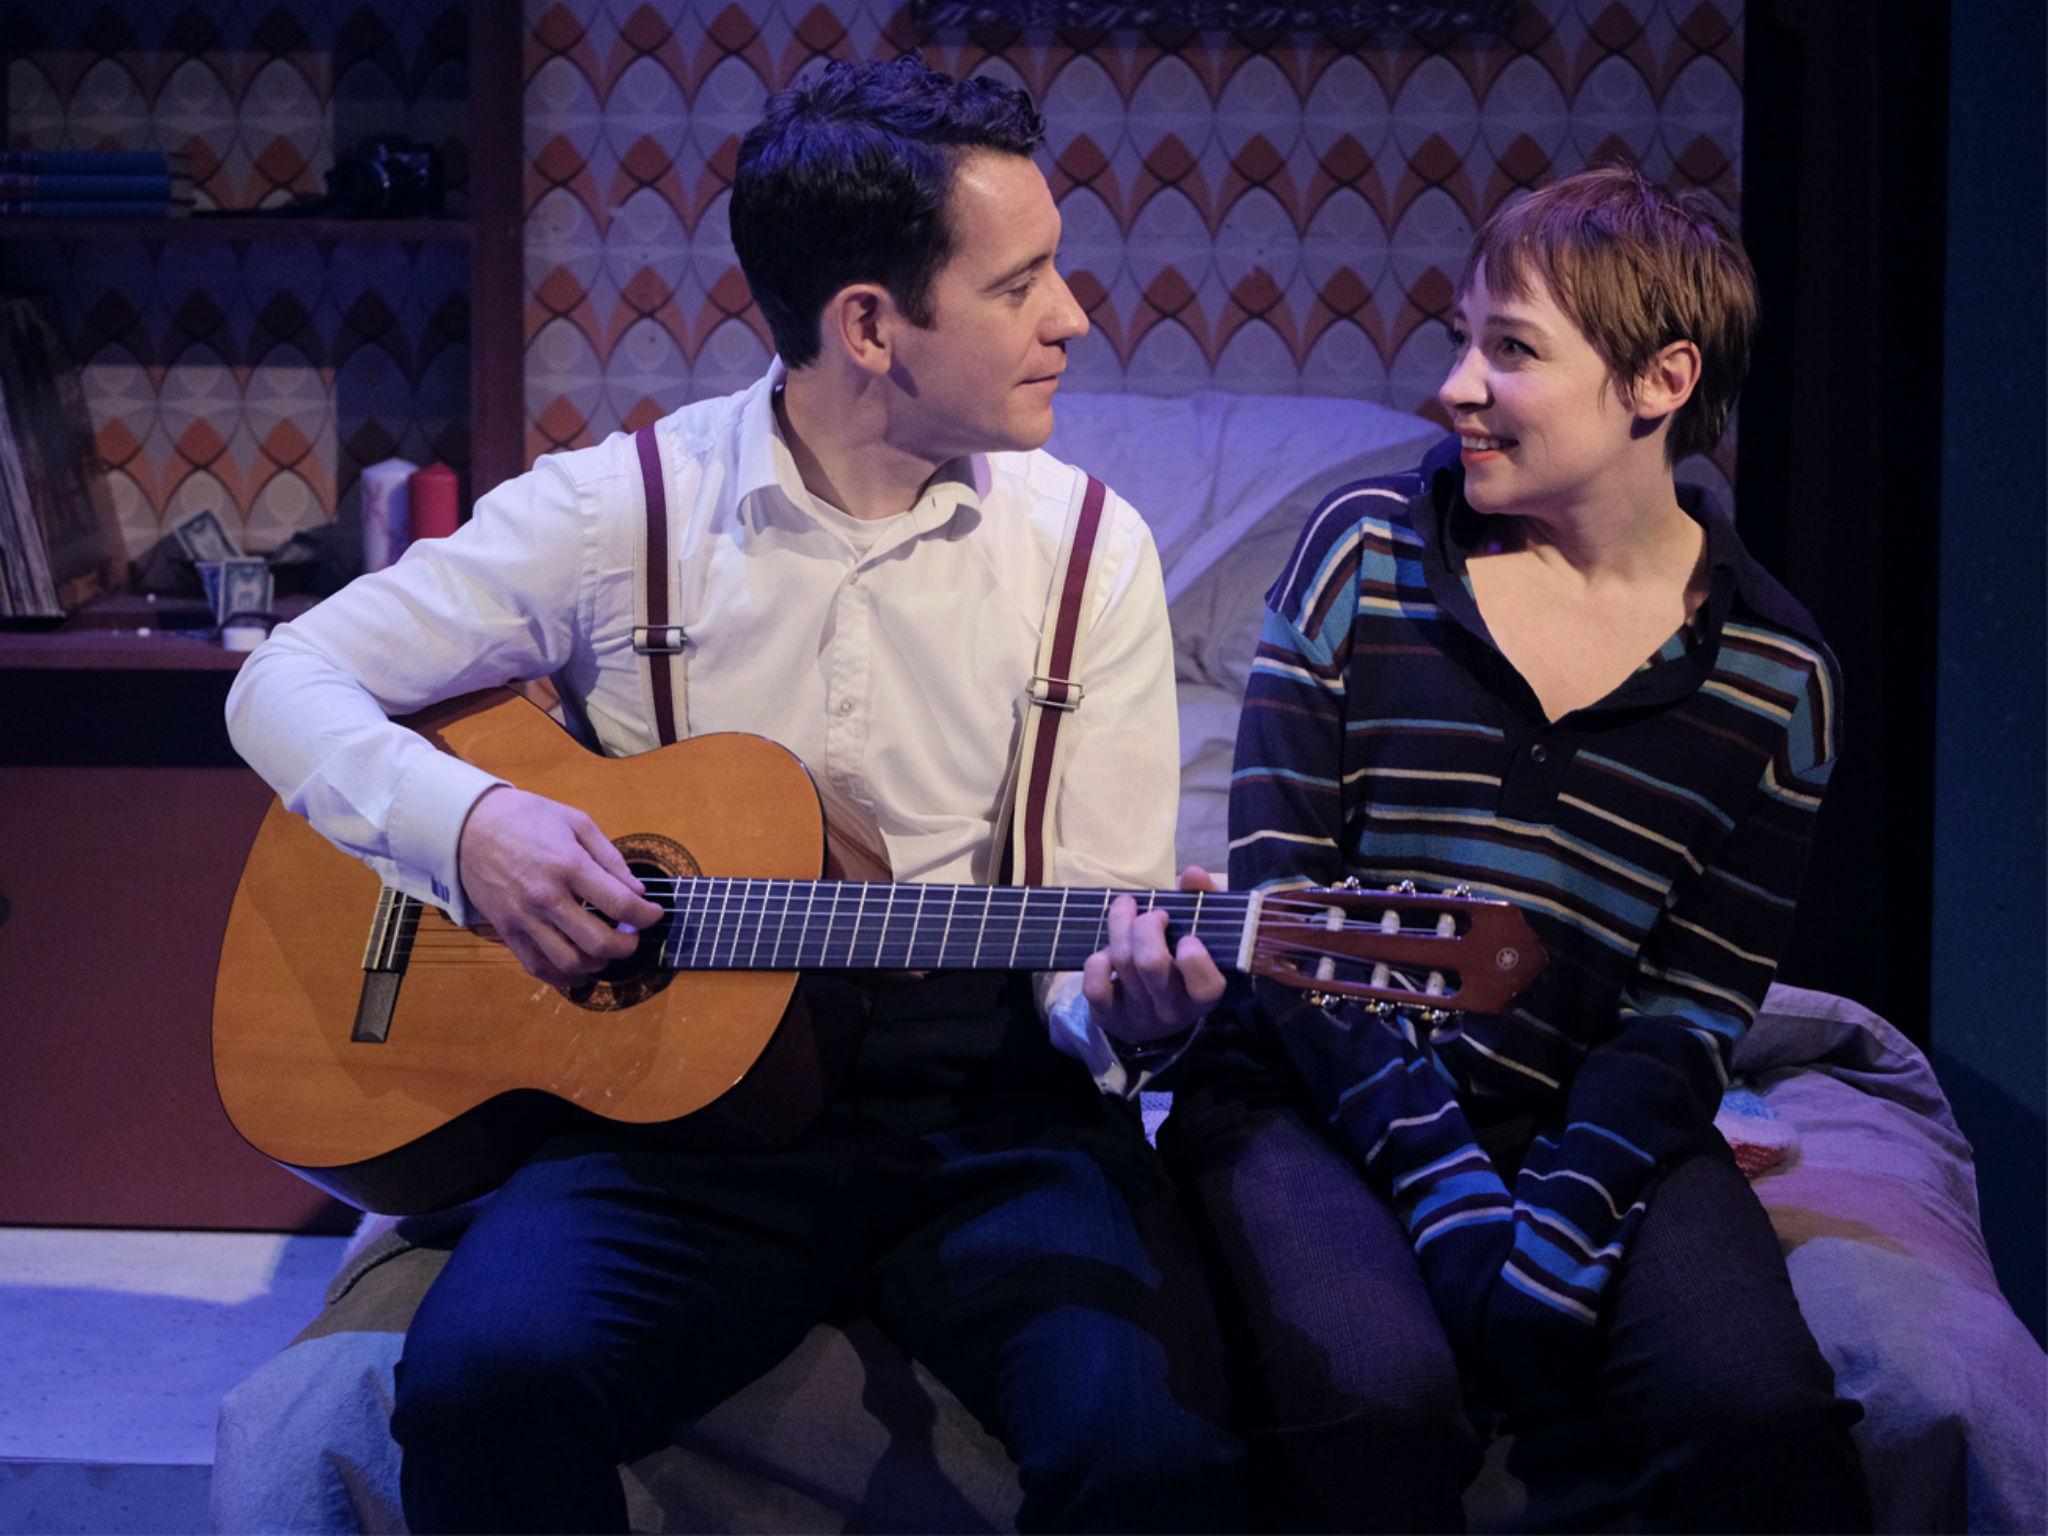 Gabriel Vick as Chuck and Daisy Maywood as Fran in 'Promises, Promises' at Southwark Playhouse